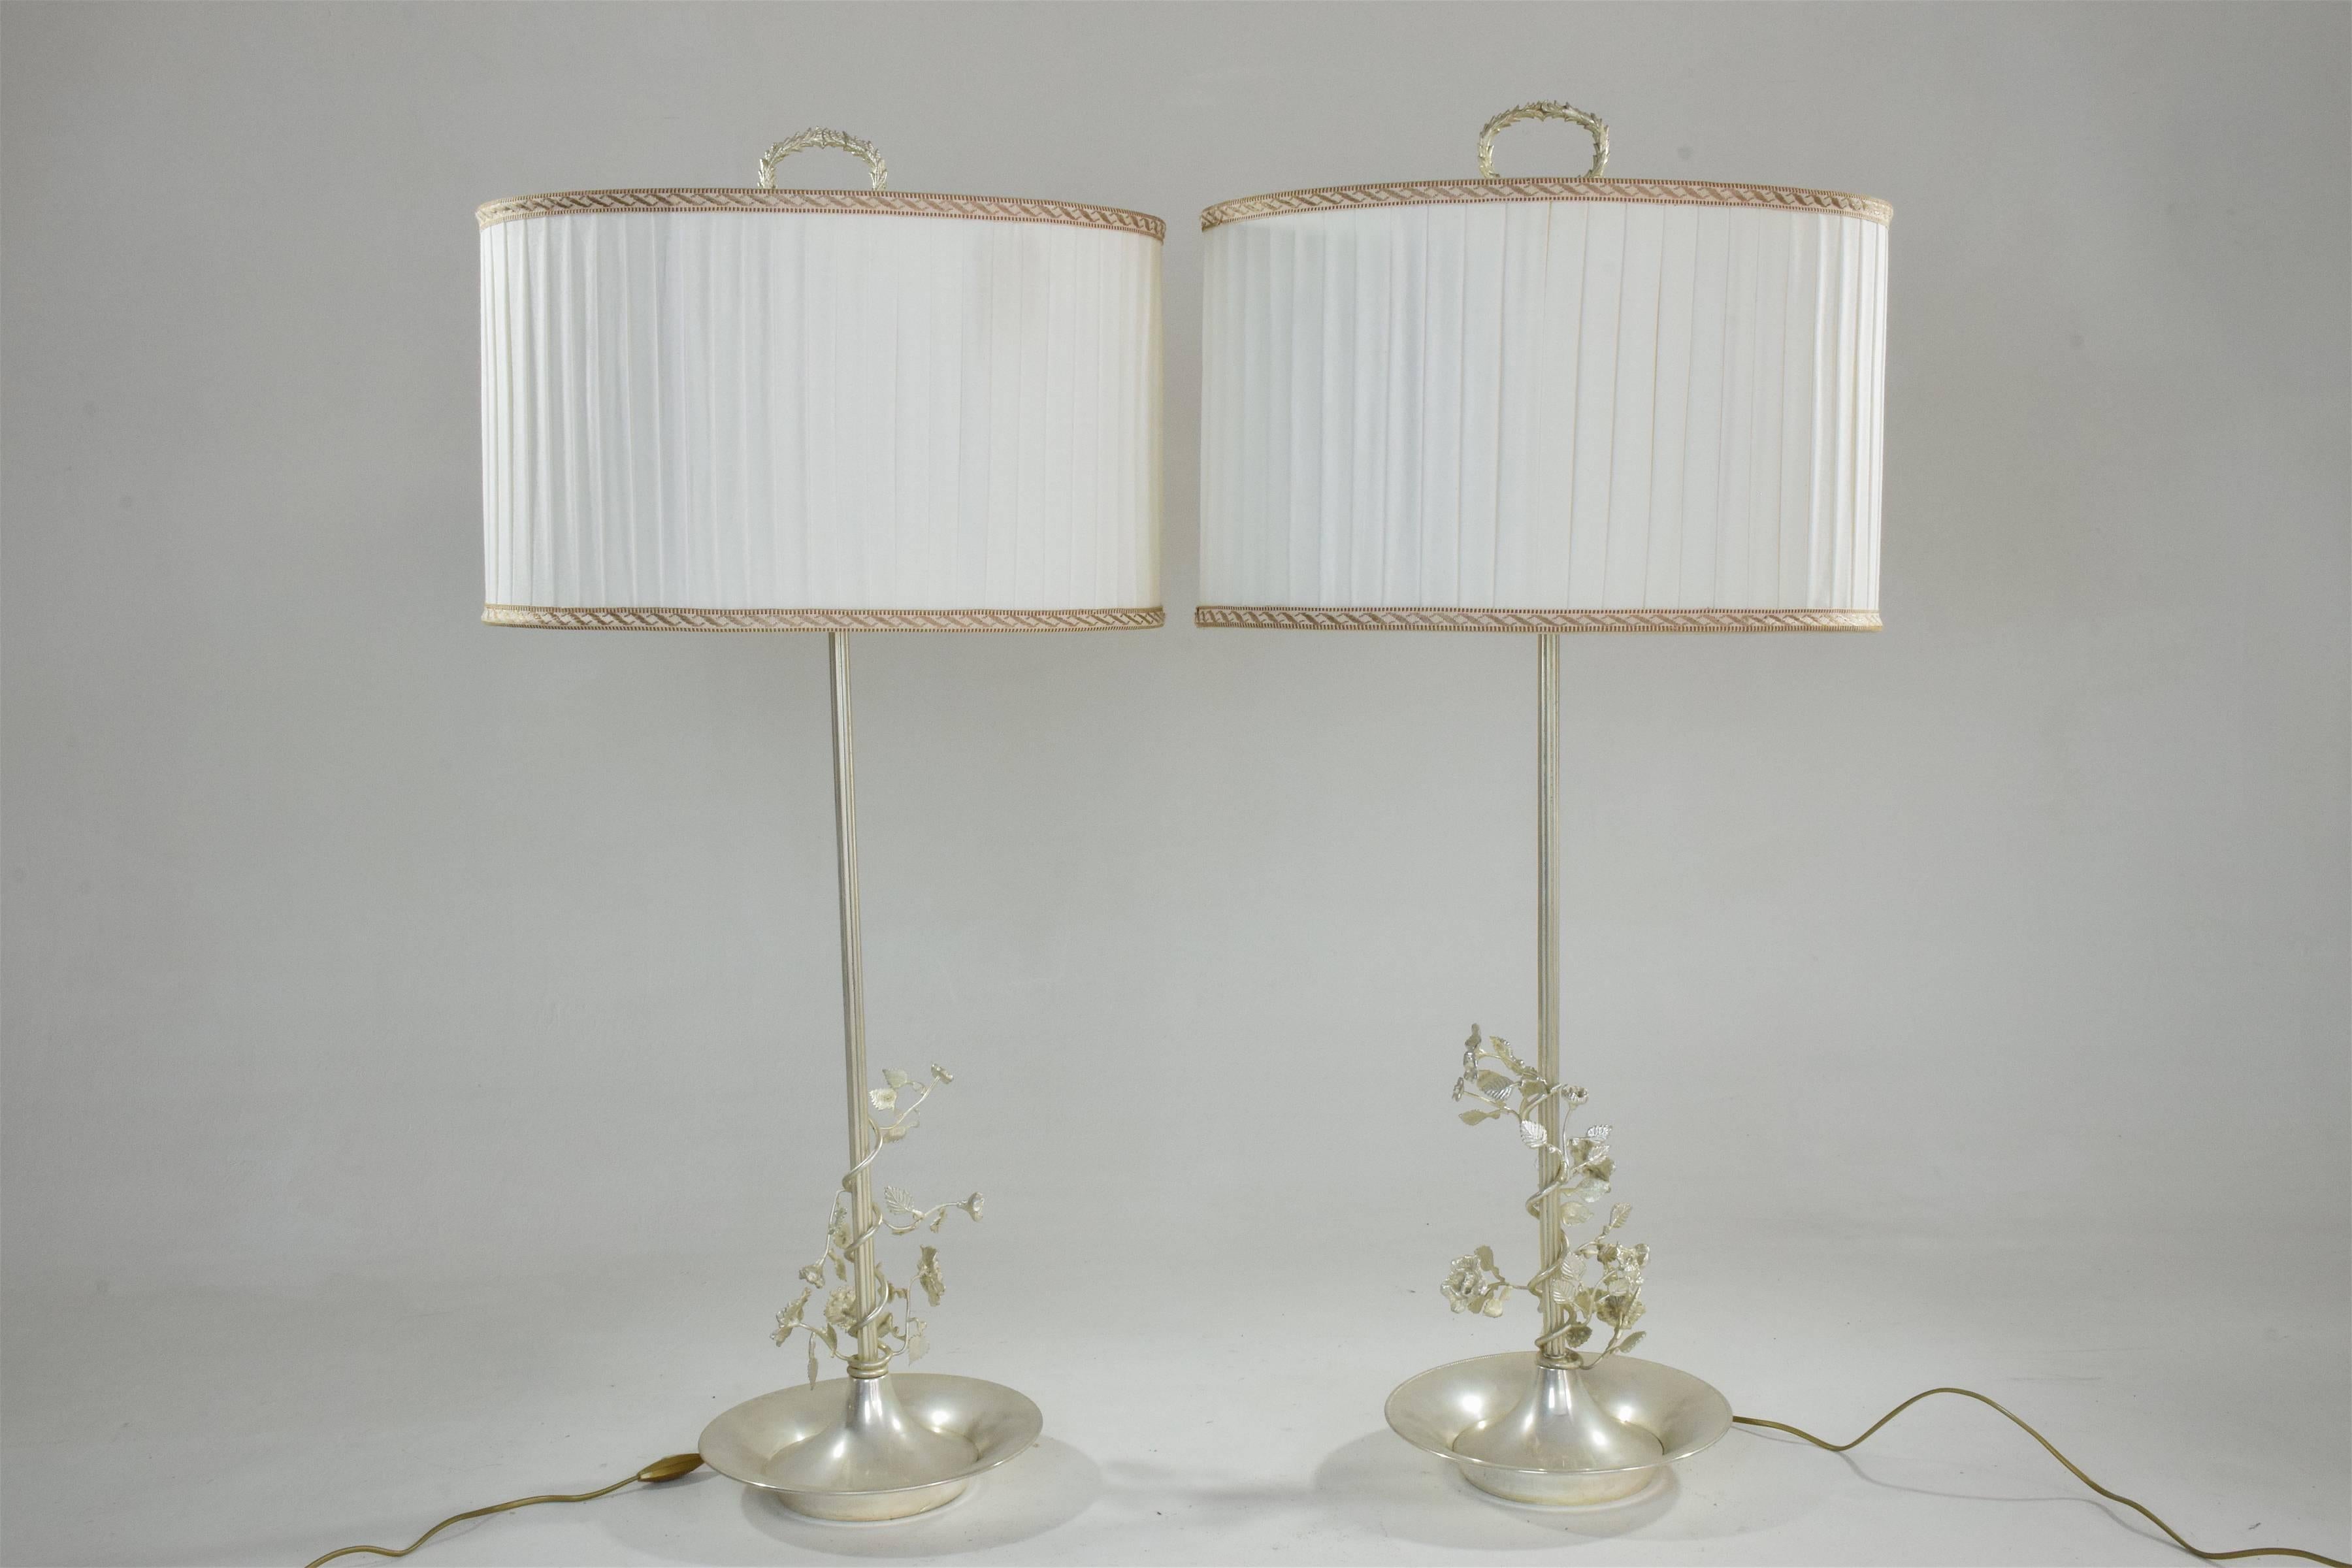 20th Century vintage pair of silver plated, 1960s table lamps with flower designs of exceptional craftsmanship. Marked by Spanish silverware makers Valmazan. 
The shades are in an excellent original condition and have been carefully cleaned, we have